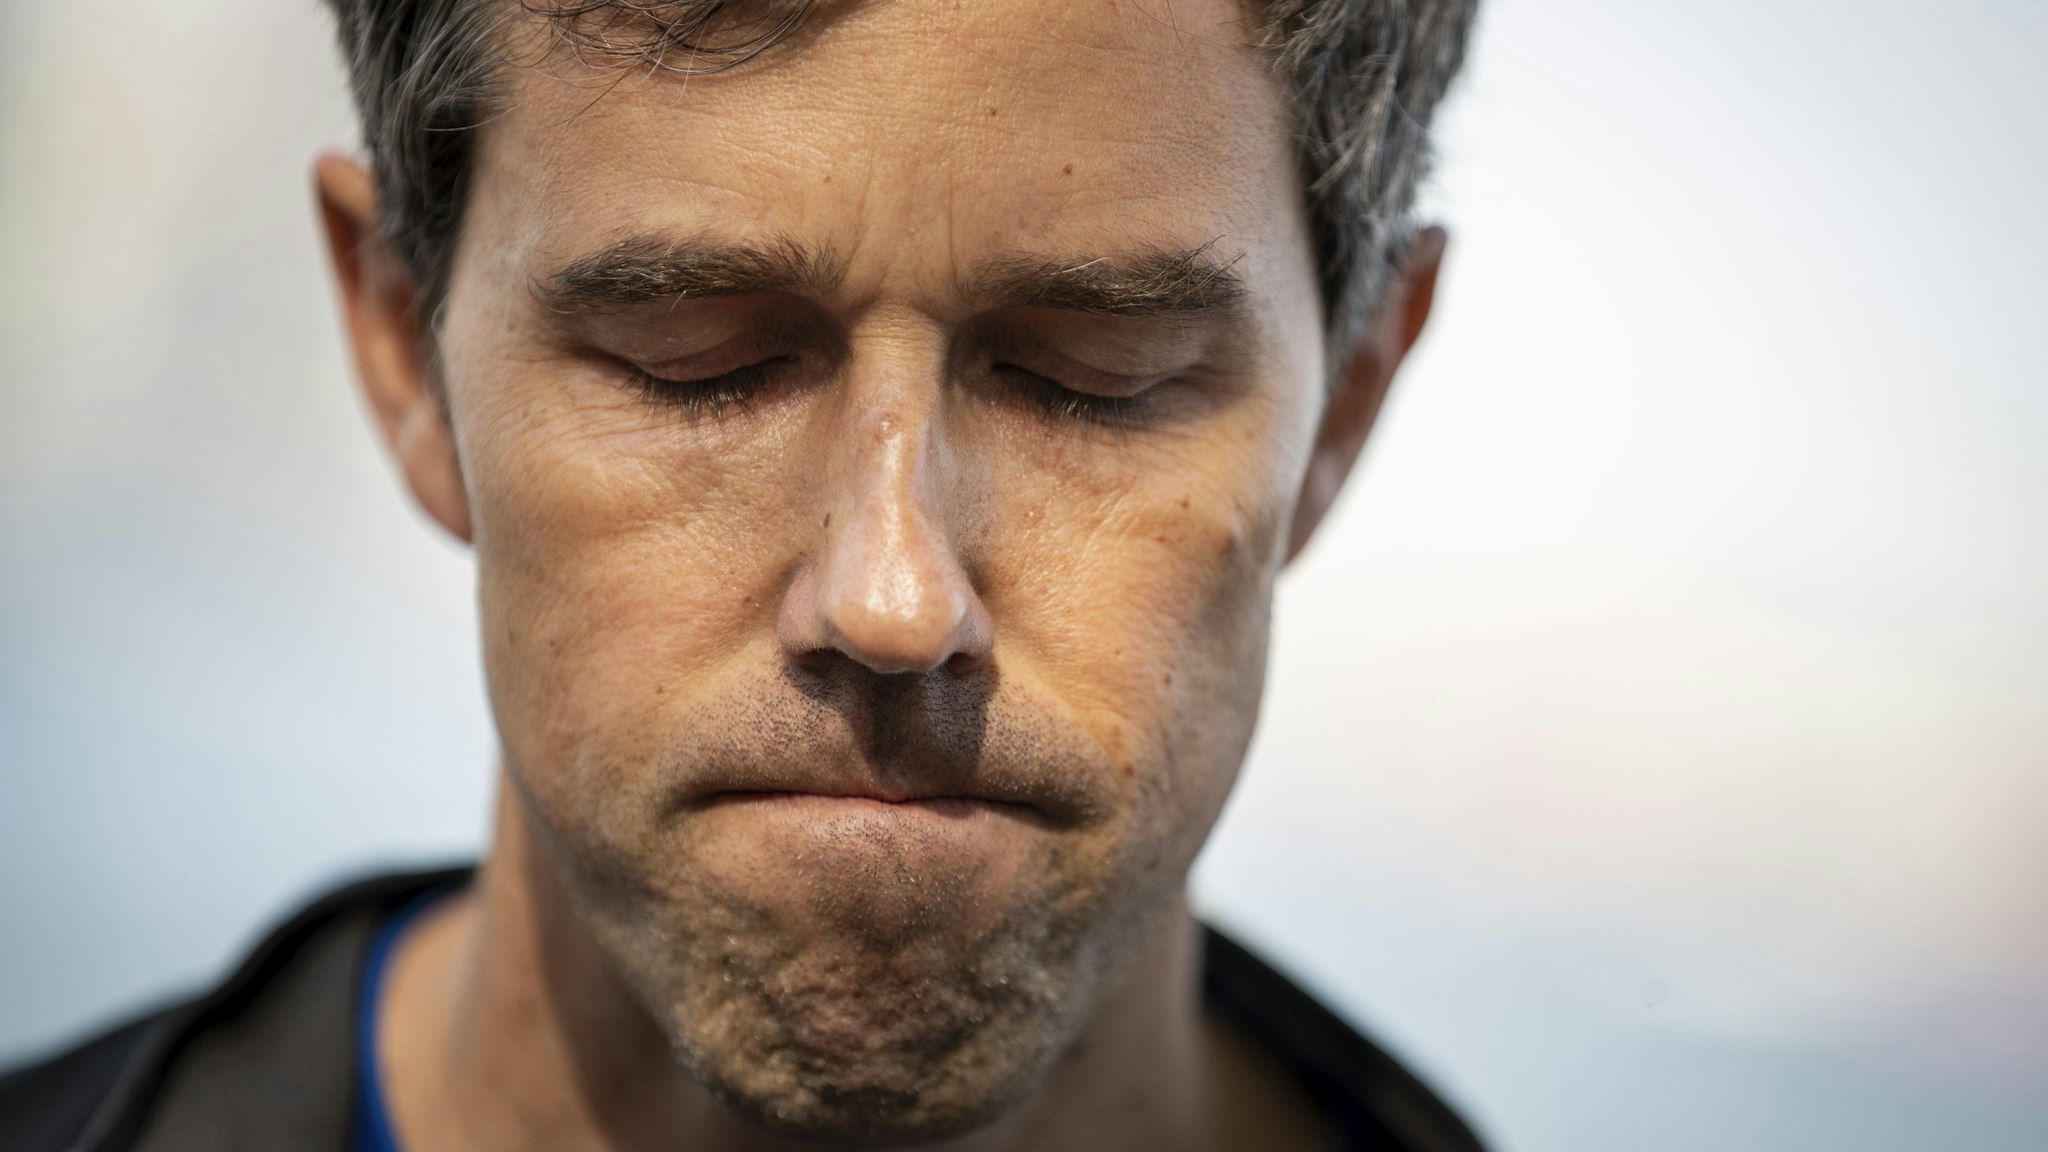 Democratic presidential candidate and former U.S. Rep. Beto O'Rourke speaks to the press after taking part in a Pride month run, June 12, 2019 in New York City. On Wednesday, O'Rourke pledged to reverse President Donald Trump's restrictions on transgender people serving in the military and push for passage of the Equality Act if elected president.